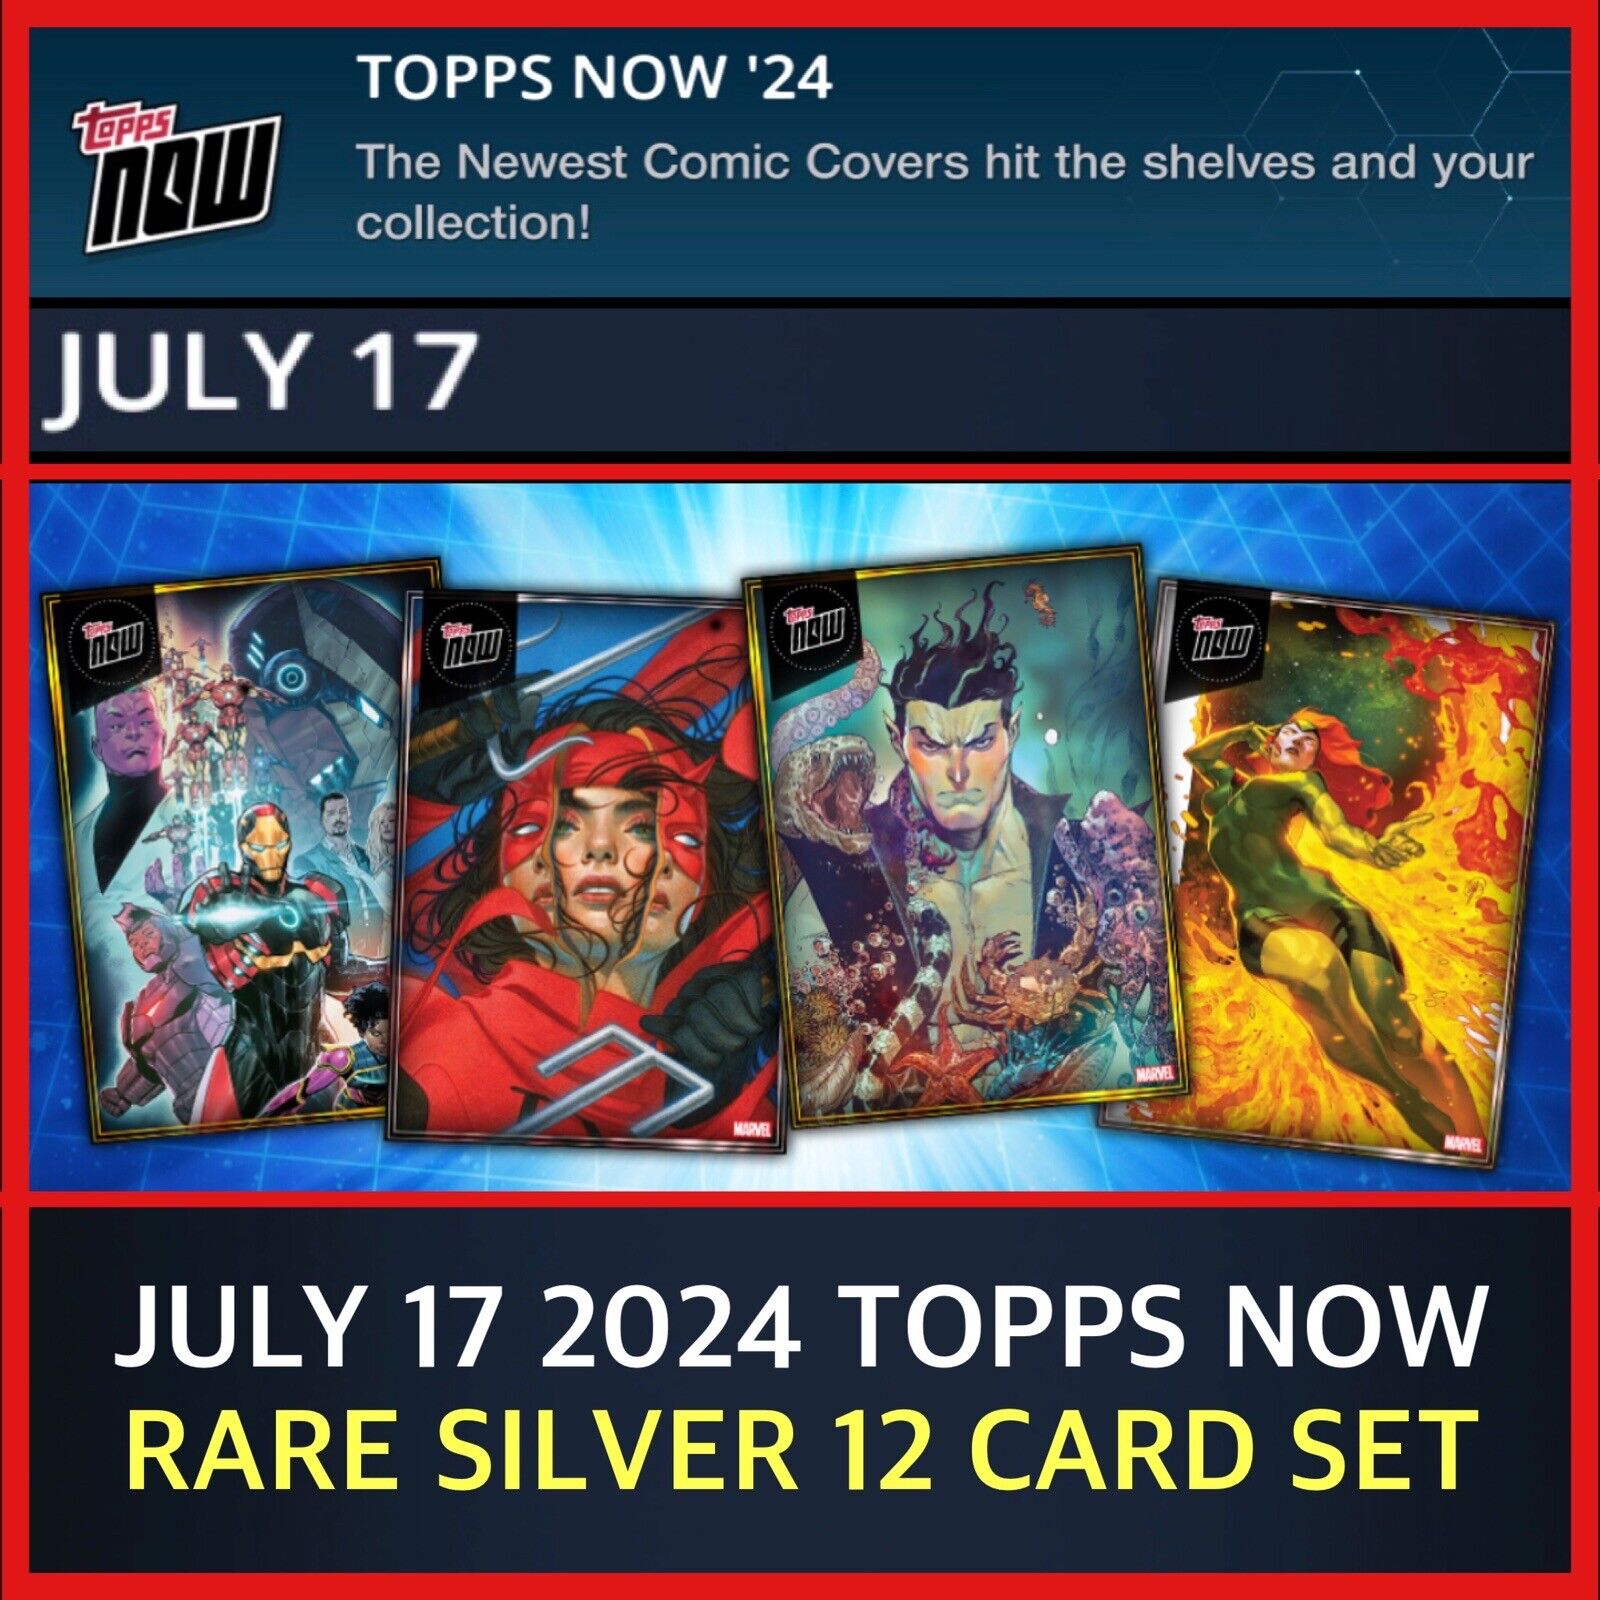 JULY 17 2024 TOPPS NOW DIGITAL-RARE SILVER 12 CARD SET-TOPPS MARVEL COLLECT